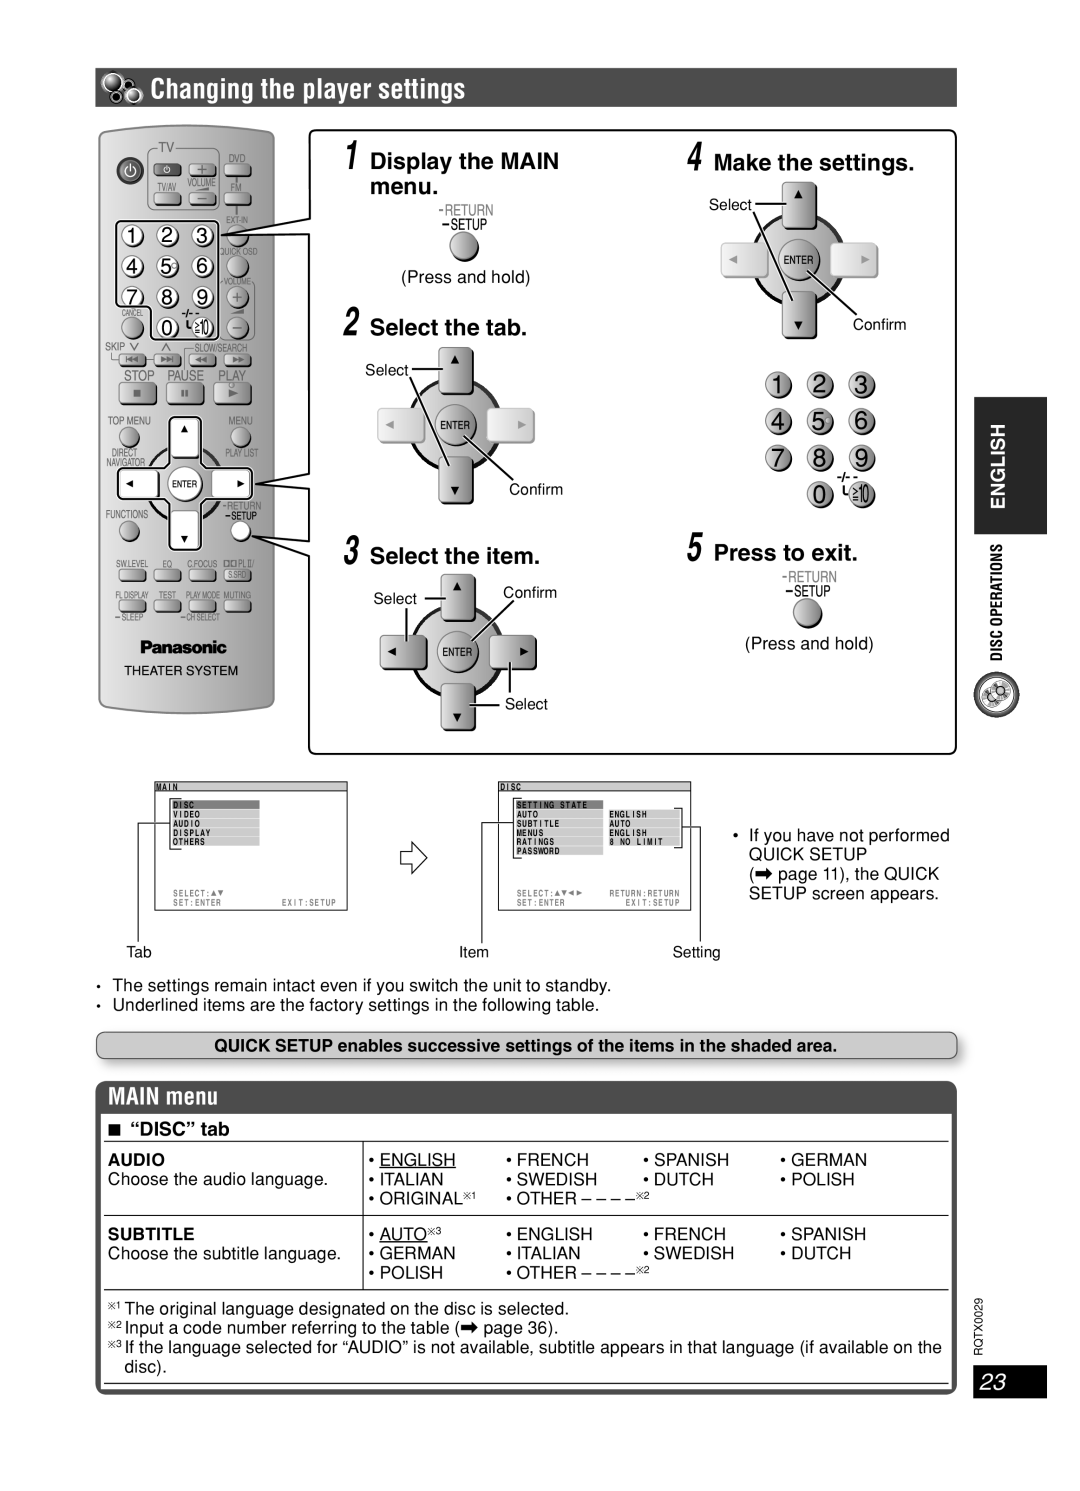 Panasonic sc-pt150 Changing the player settings, Display the MAIN, menu, Select the tab, Select the item, Press to exit 